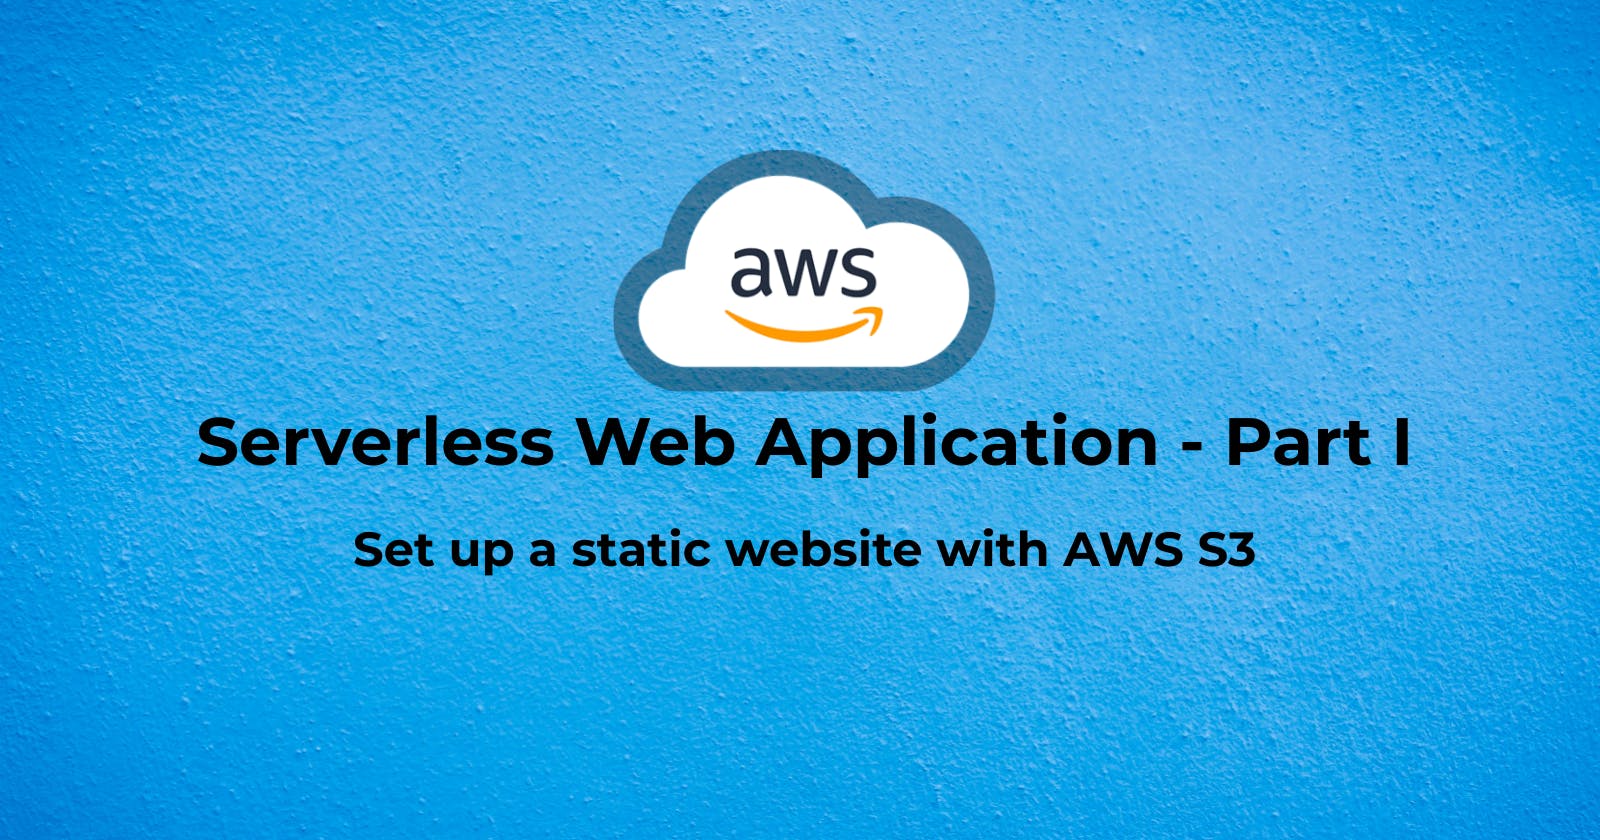 Hosting  a Serverless Web Application in AWS - Part I